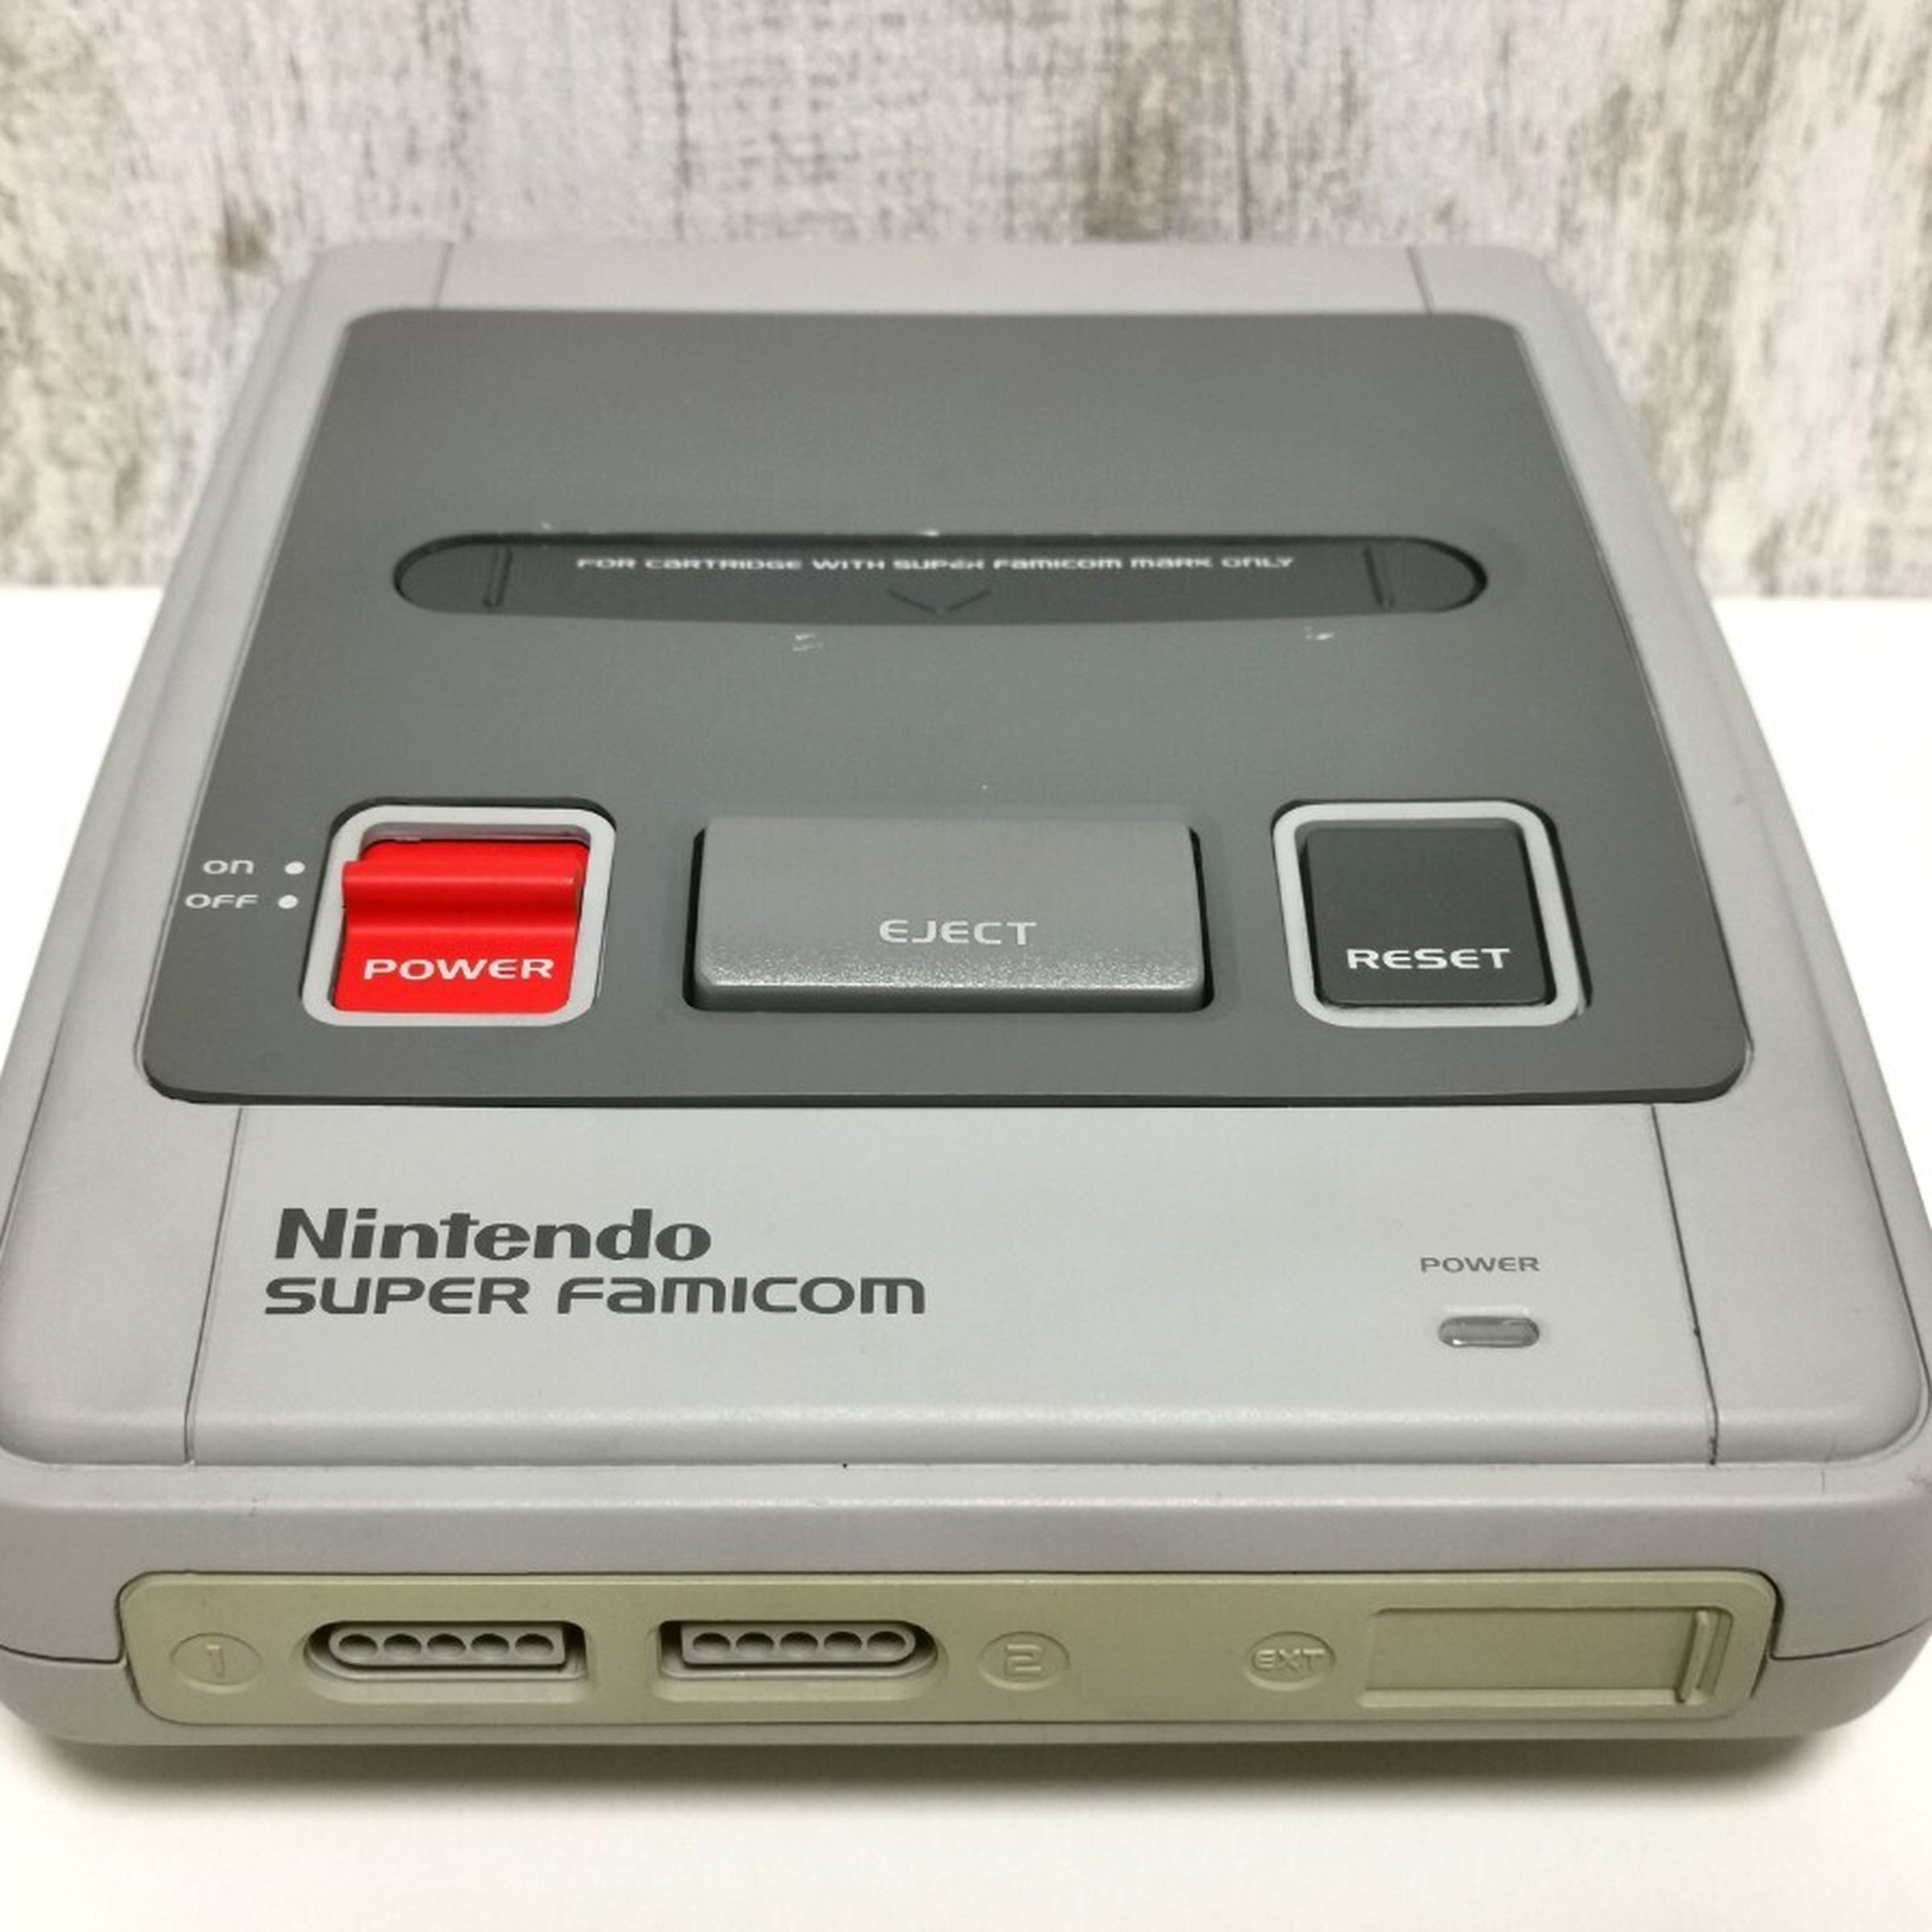 Front view of the Super Famicom prototype.